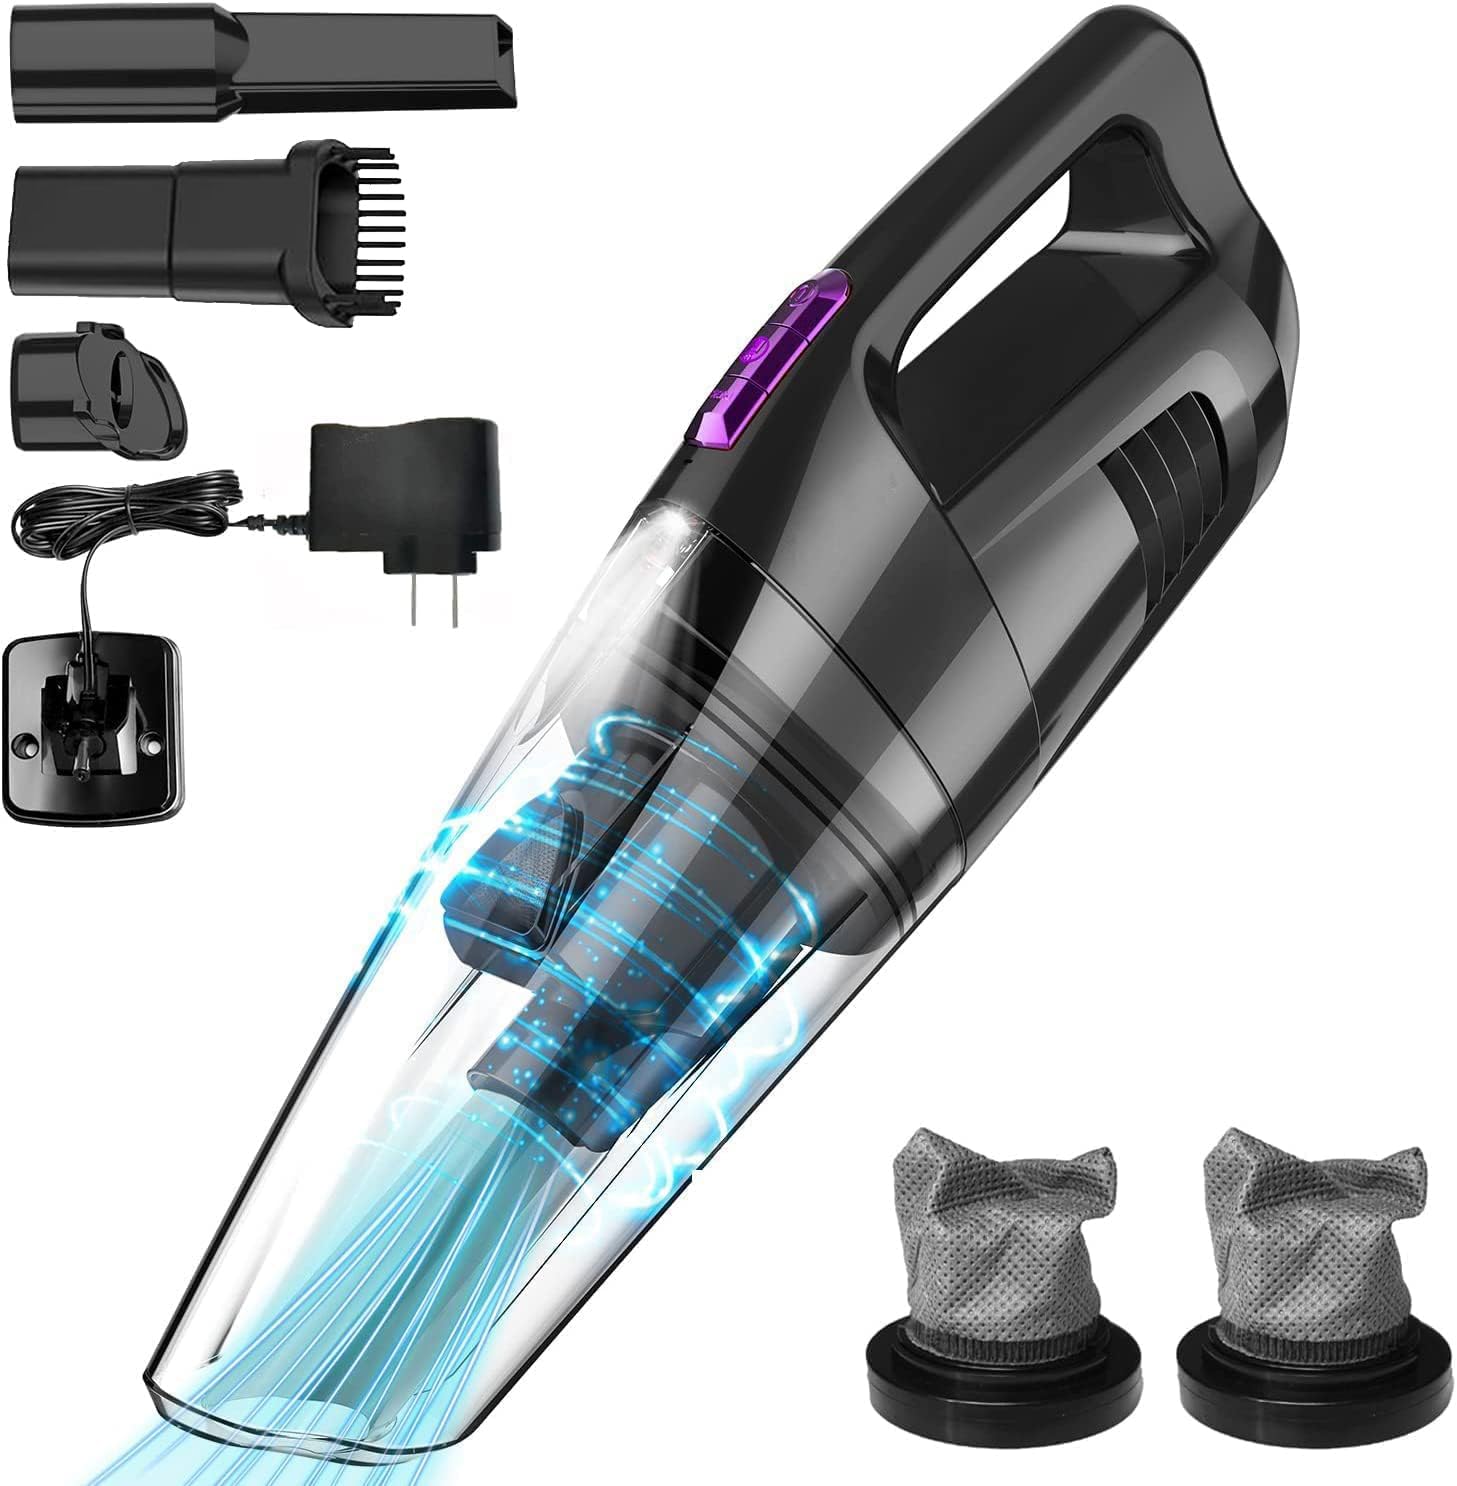 whall® Handheld Vacuum Cordless, 8500PA Strong Suction Hand Vacuum, Wet Dry Hand Held Vacuum Cleaner with LED Light, Lightweight Mini Car Vacuum Cordless Rechargeable, Portable Vacuum